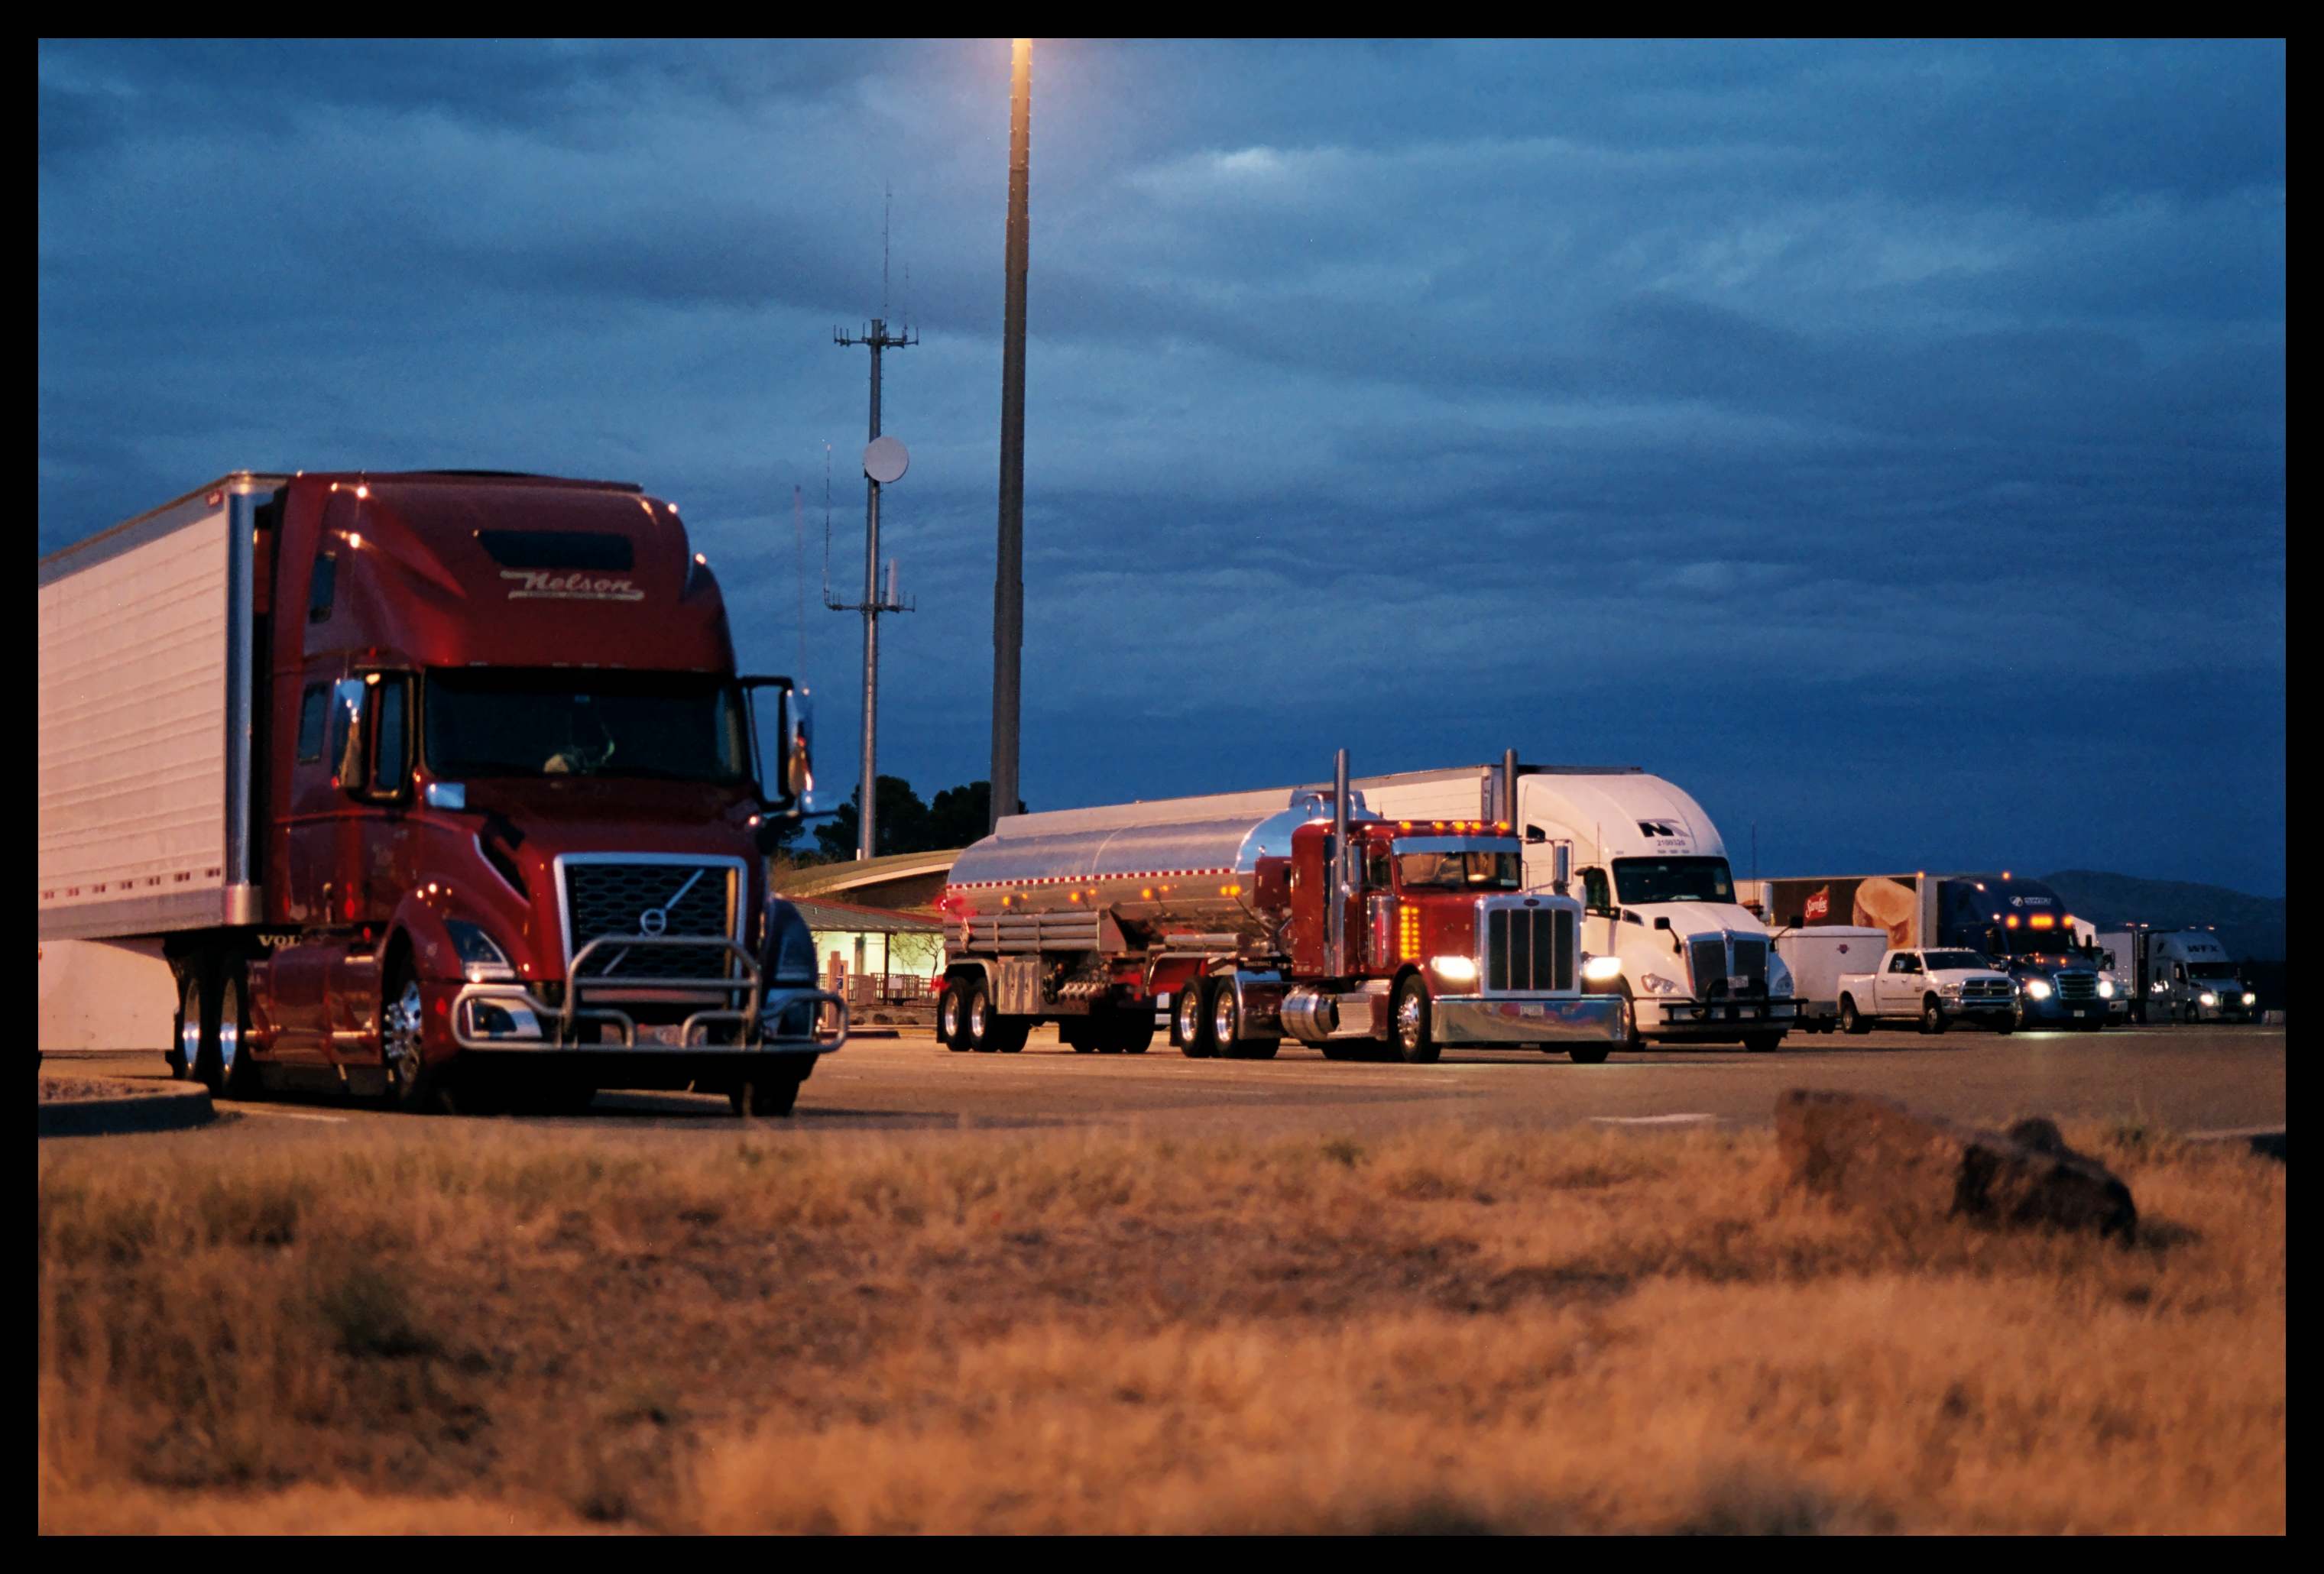 Photo of some trucks after sunset